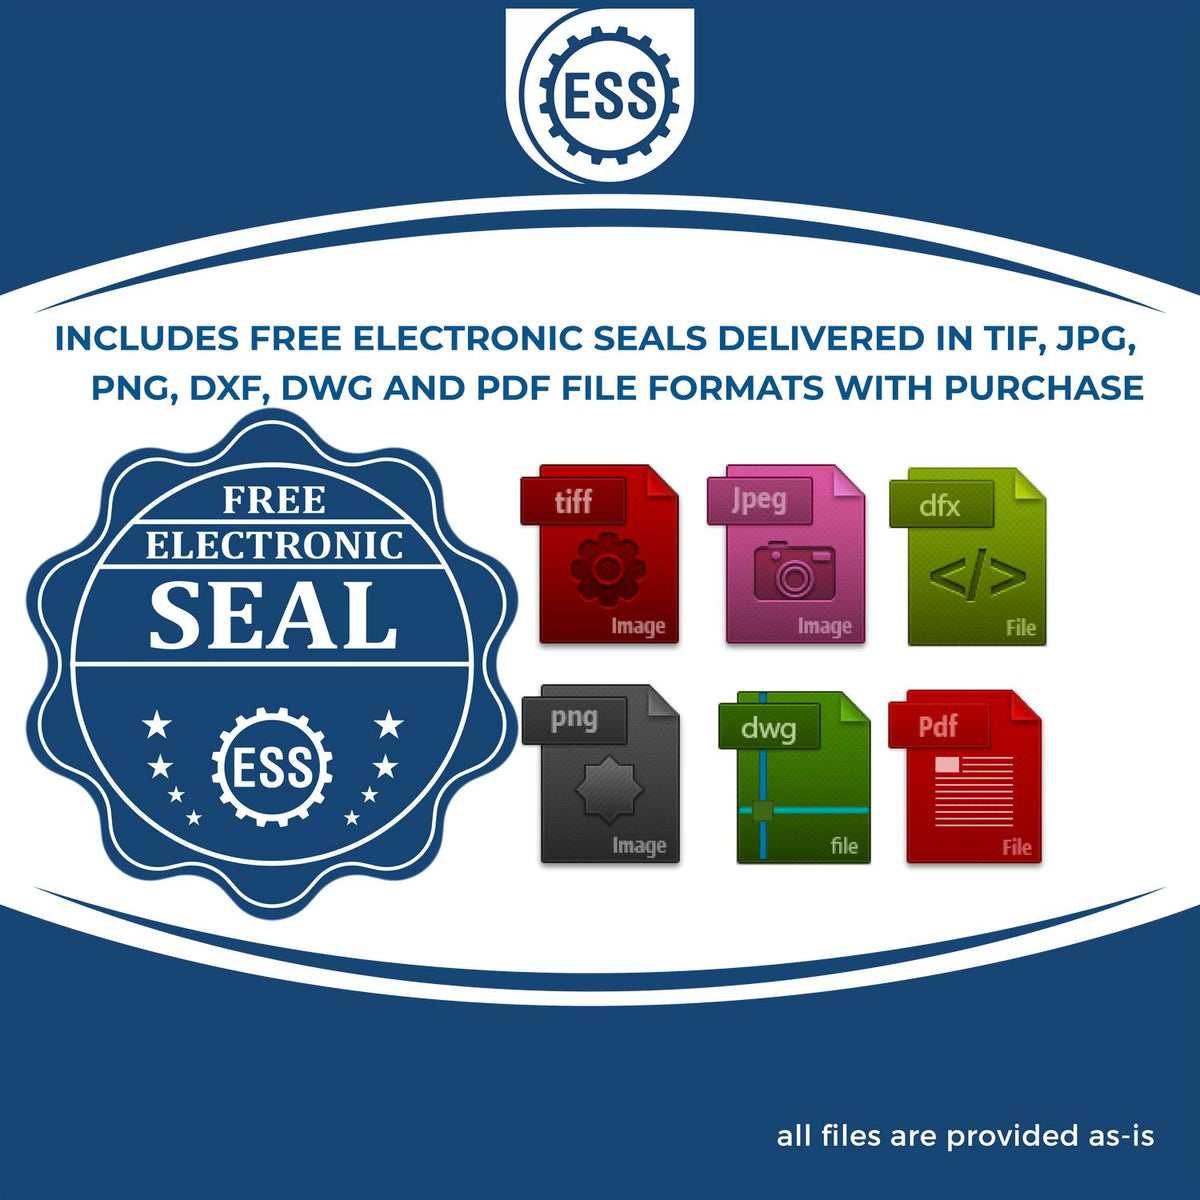 An infographic for the free electronic seal for the Self-Inking South Carolina PE Stamp illustrating the different file type icons such as DXF, DWG, TIF, JPG and PNG.